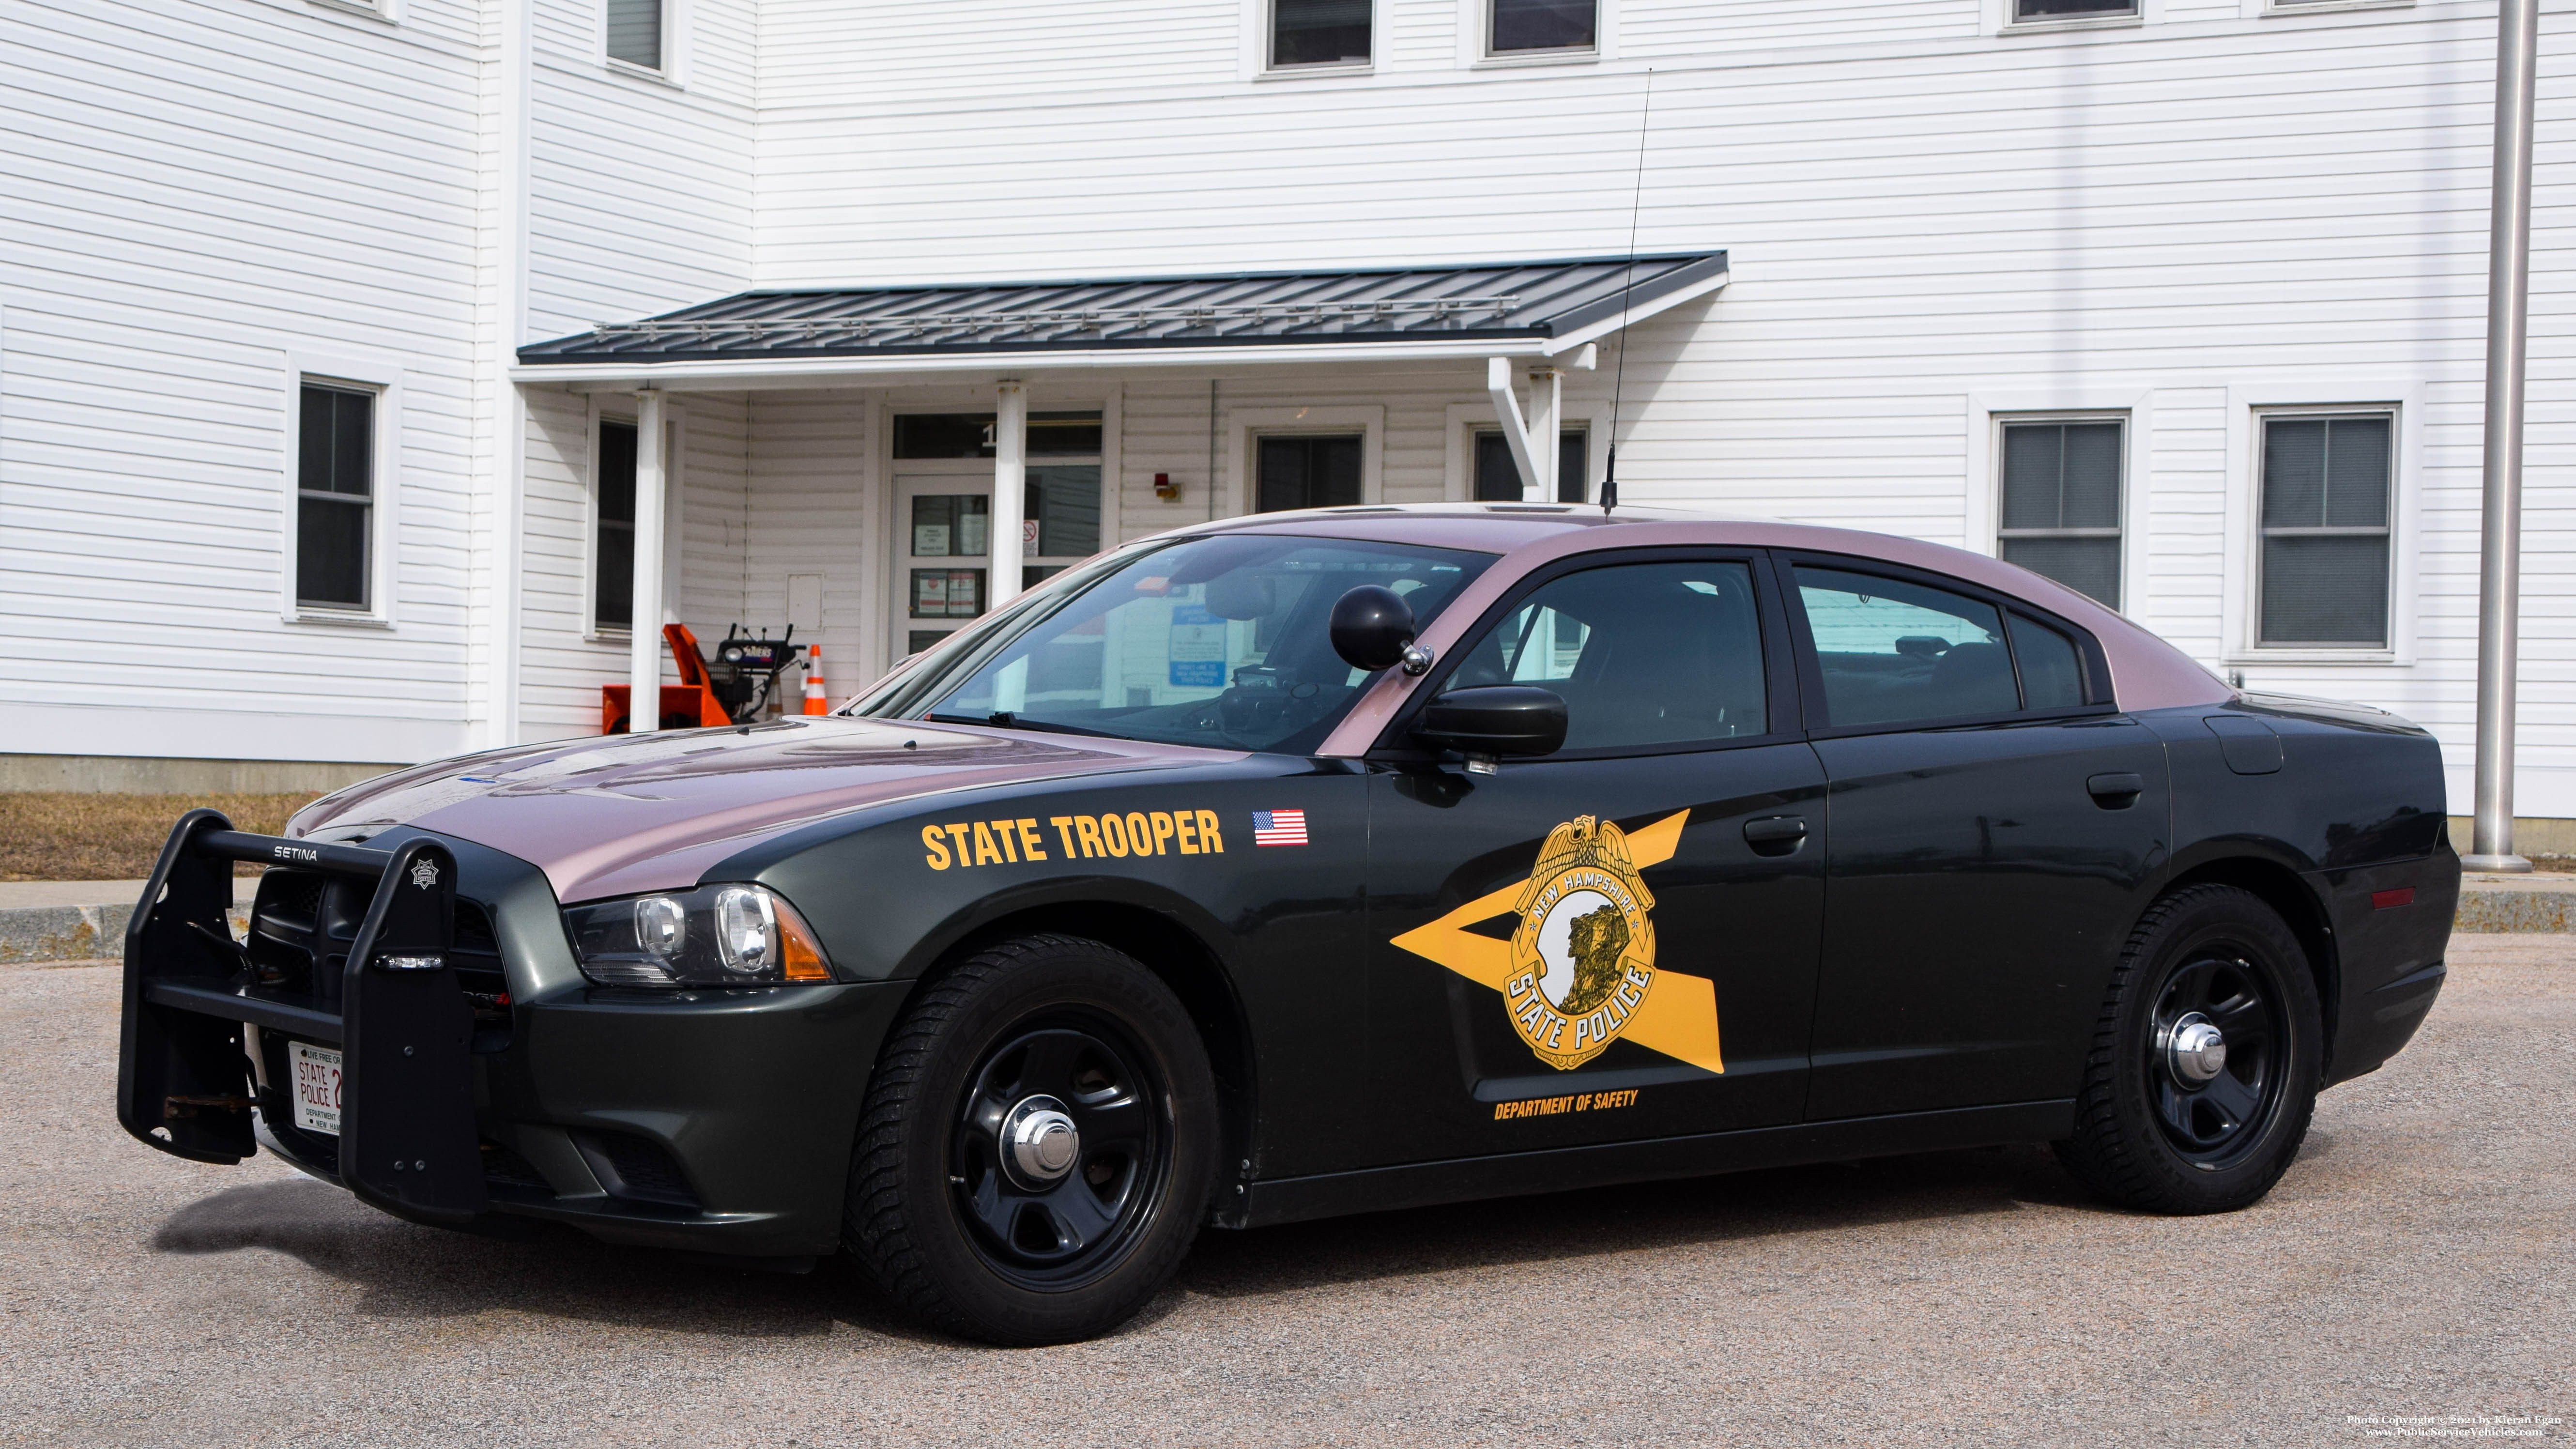 A photo  of New Hampshire State Police
            Cruiser 200, a 2014 Dodge Charger             taken by Kieran Egan